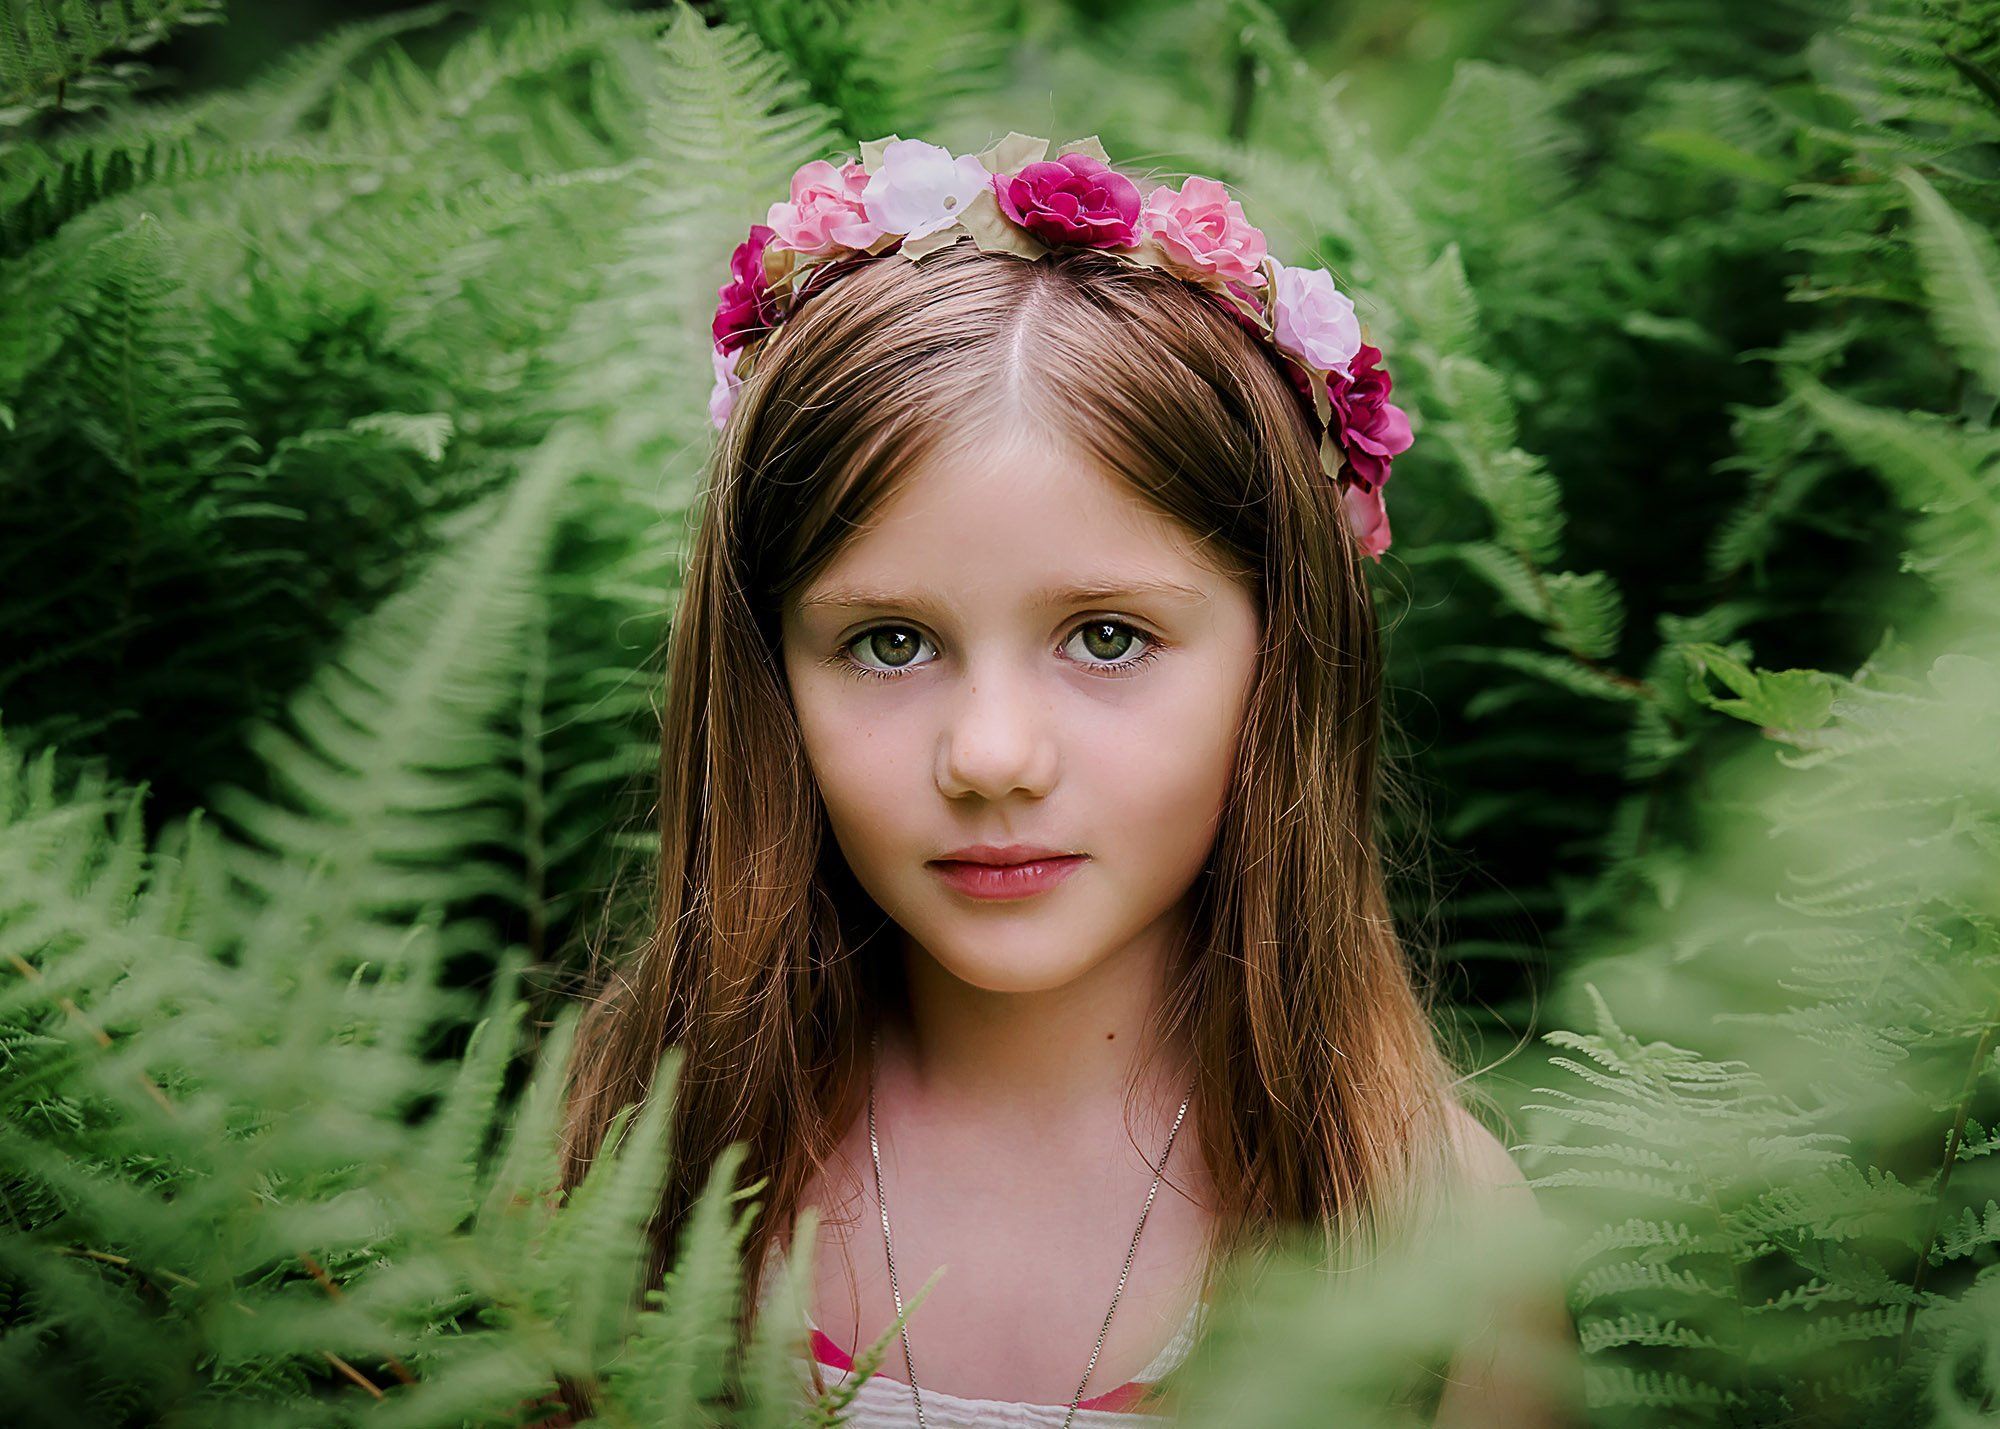 little girl sitting in a bed of ferns with a floral crown on her head